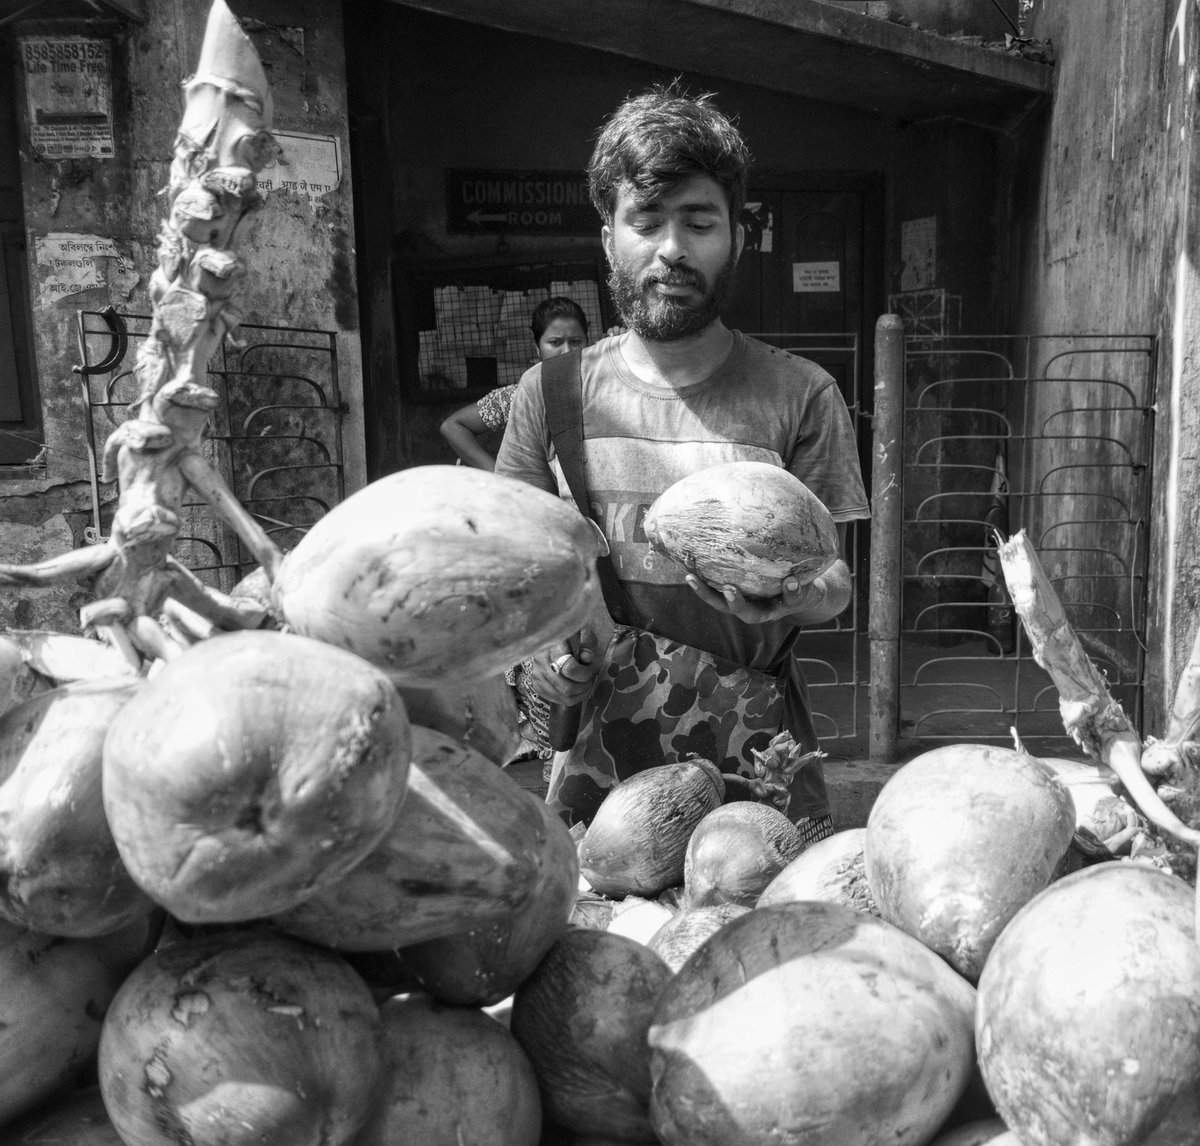 Wanna beat the hot summers? Here comes the Coconut-man selling fresh coconuts. Fresh, nutritious, and refreshing.

Smartphone: Samsung S21 FE

#nileshfz
#photography 
#smartphonephotography
#summer 
#coconut 
#india
#world